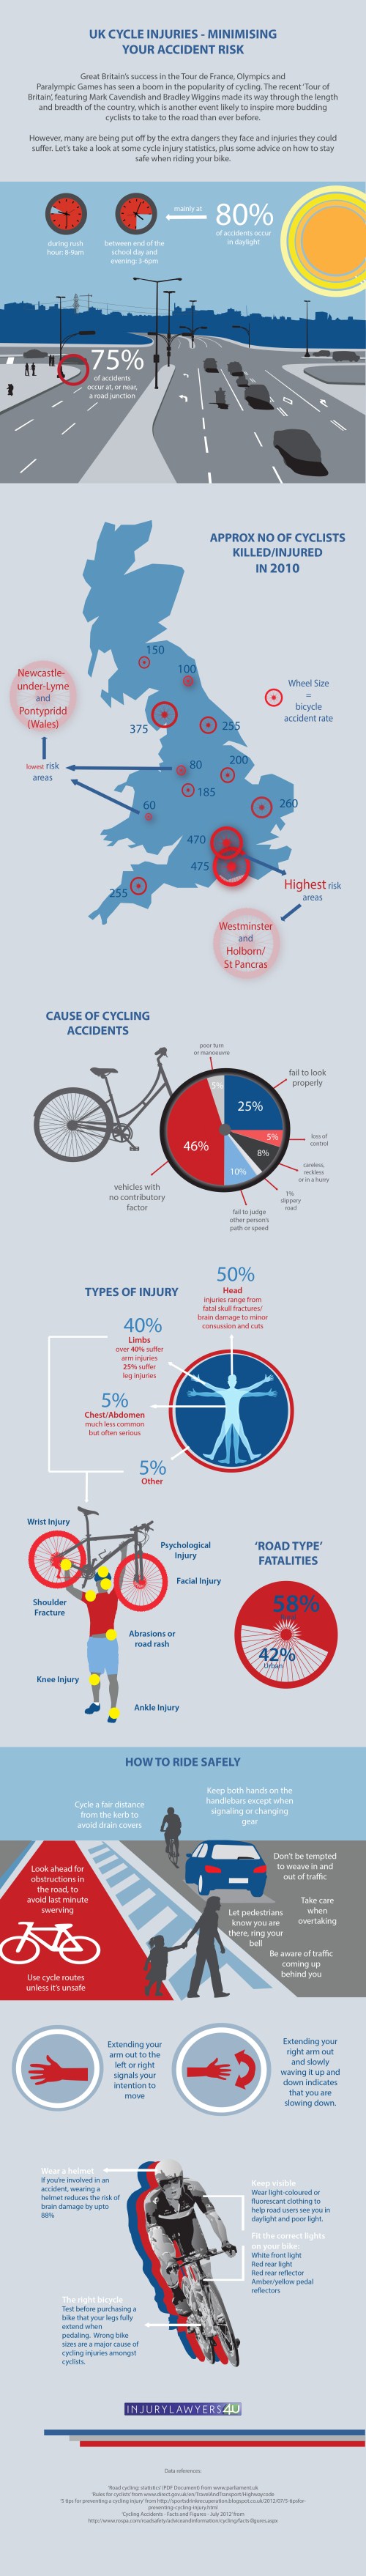 UK Cycle Accident Statistics & Tips for Staying Safe